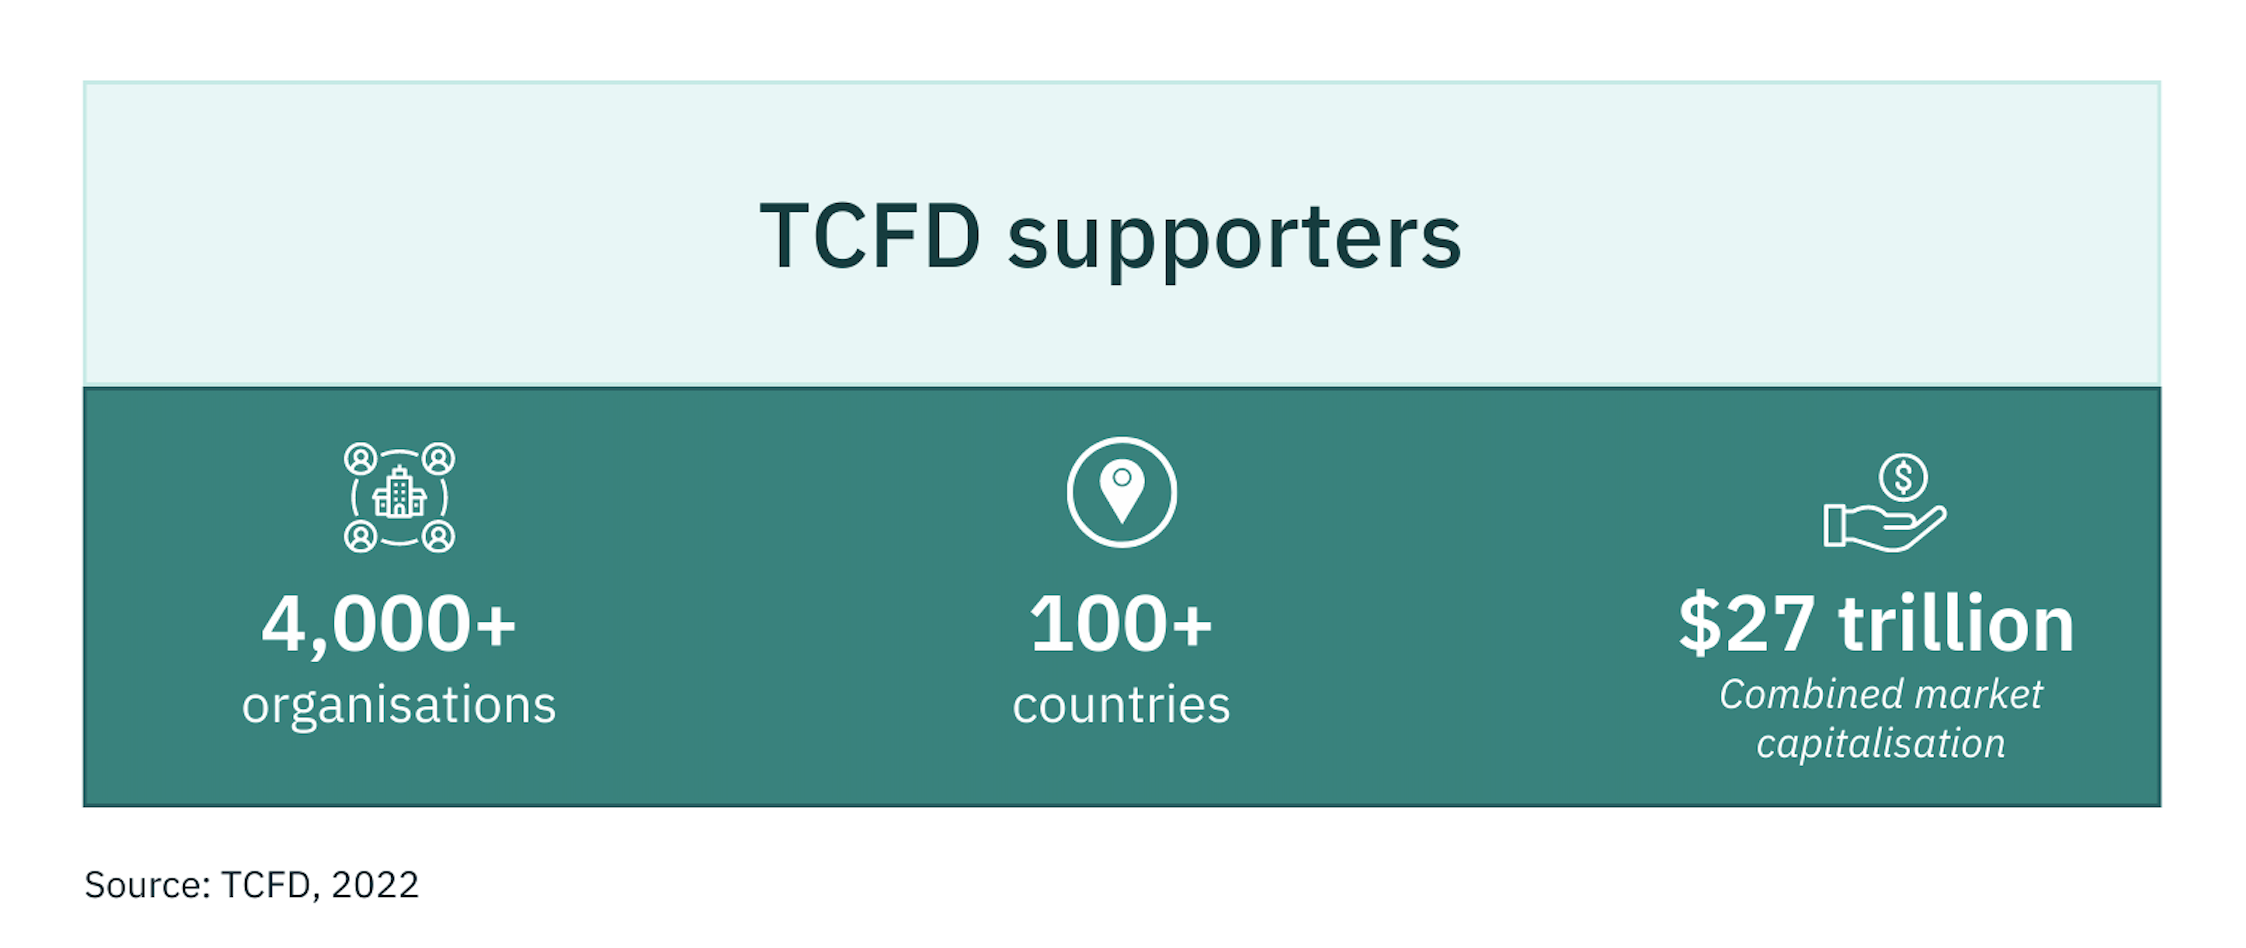 Infographic showing global support for TCFD. Includes 4,000+ organisations, 100+ countries, $27 trillion combined market capitalisation. Source: TCFD 2022.